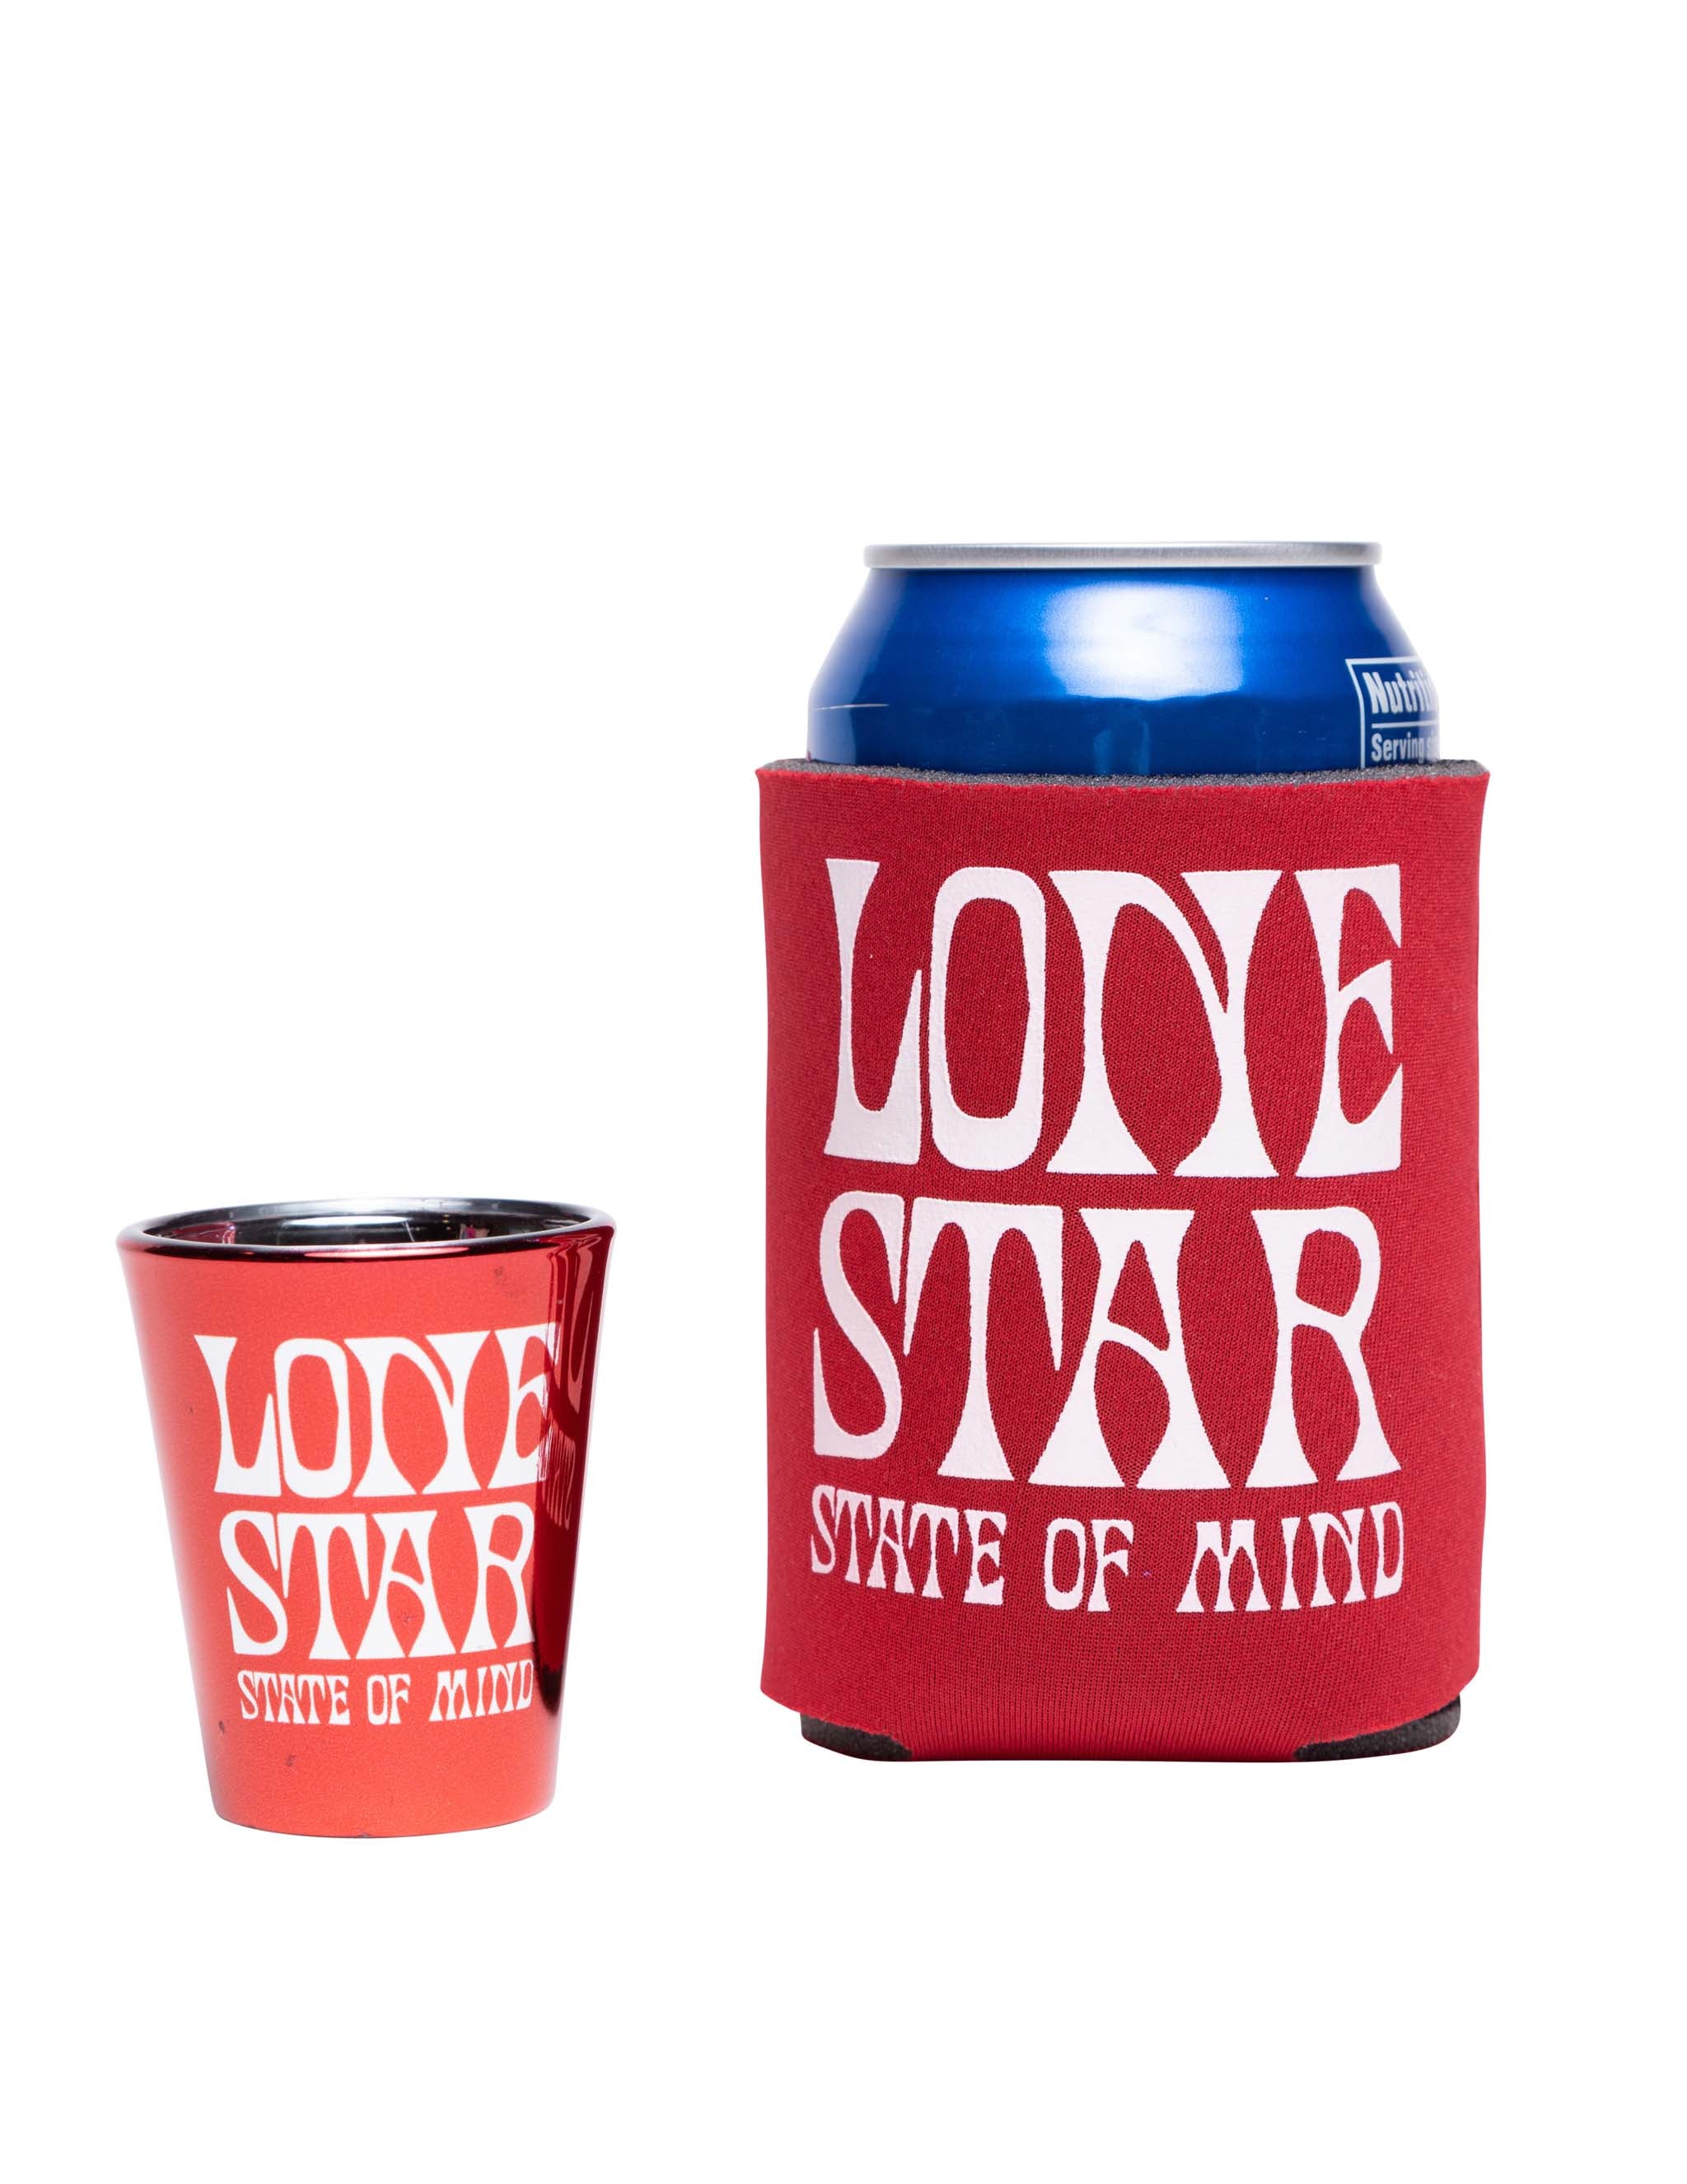 Texas Lone Star State of Mind Shot